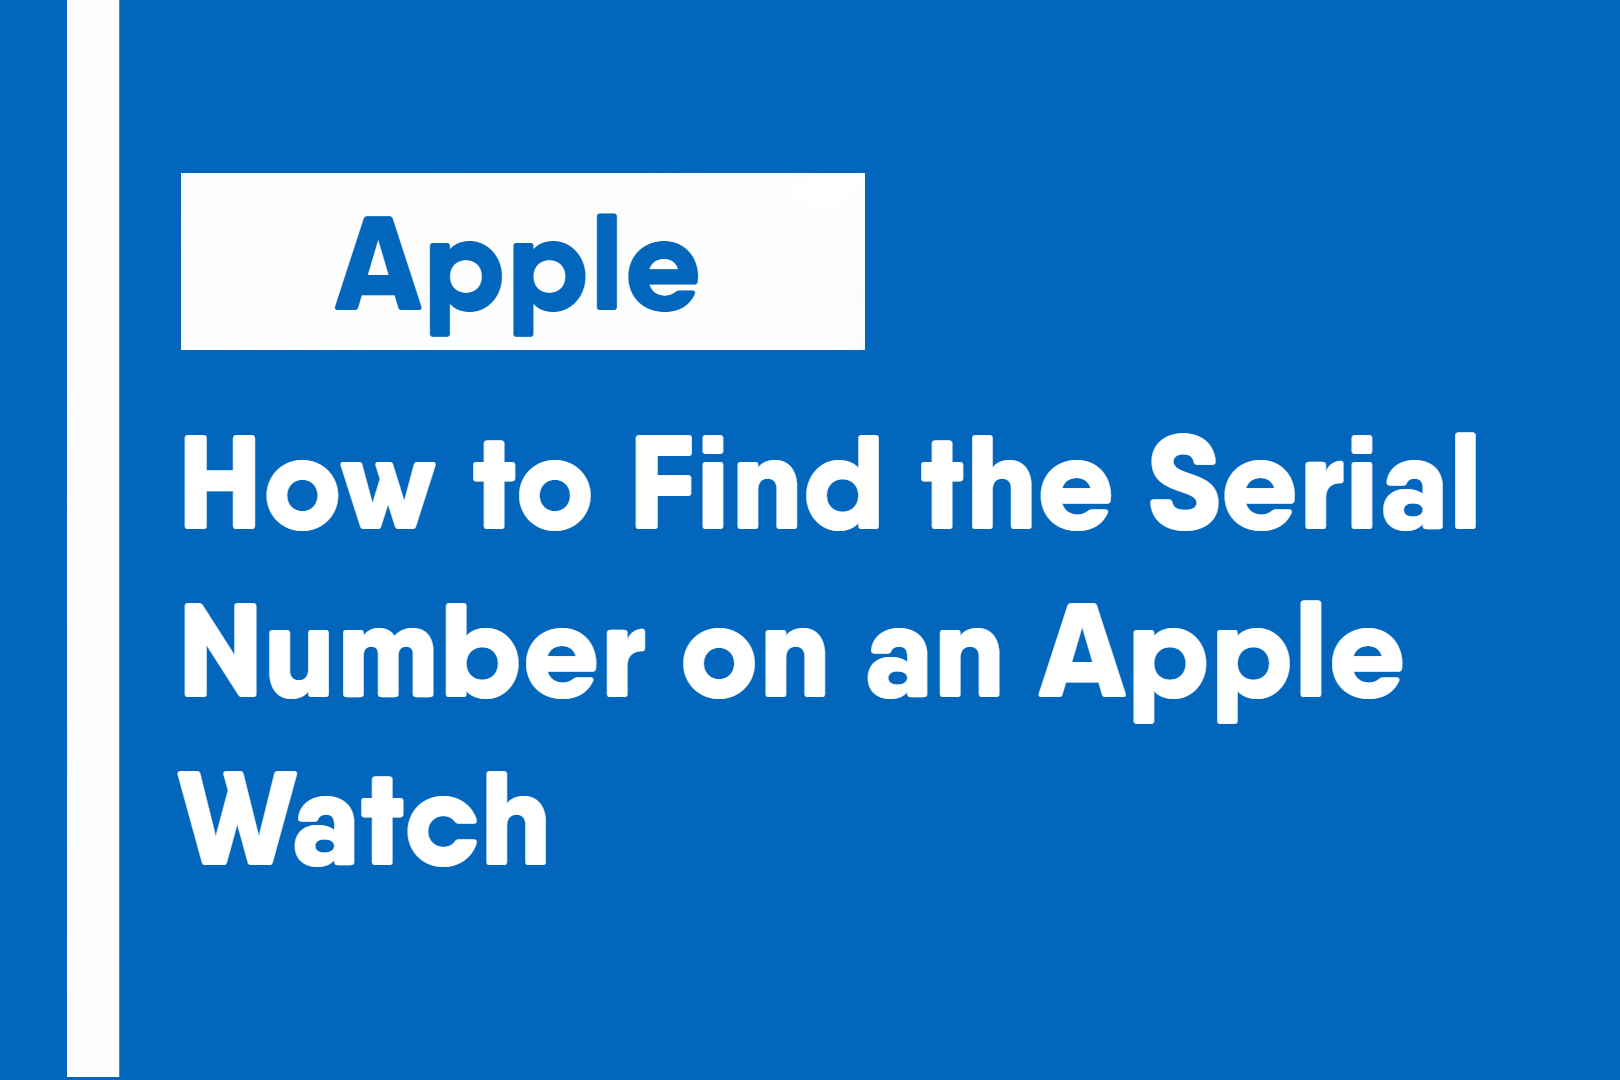 How to Find the Serial Number on an Apple Watch